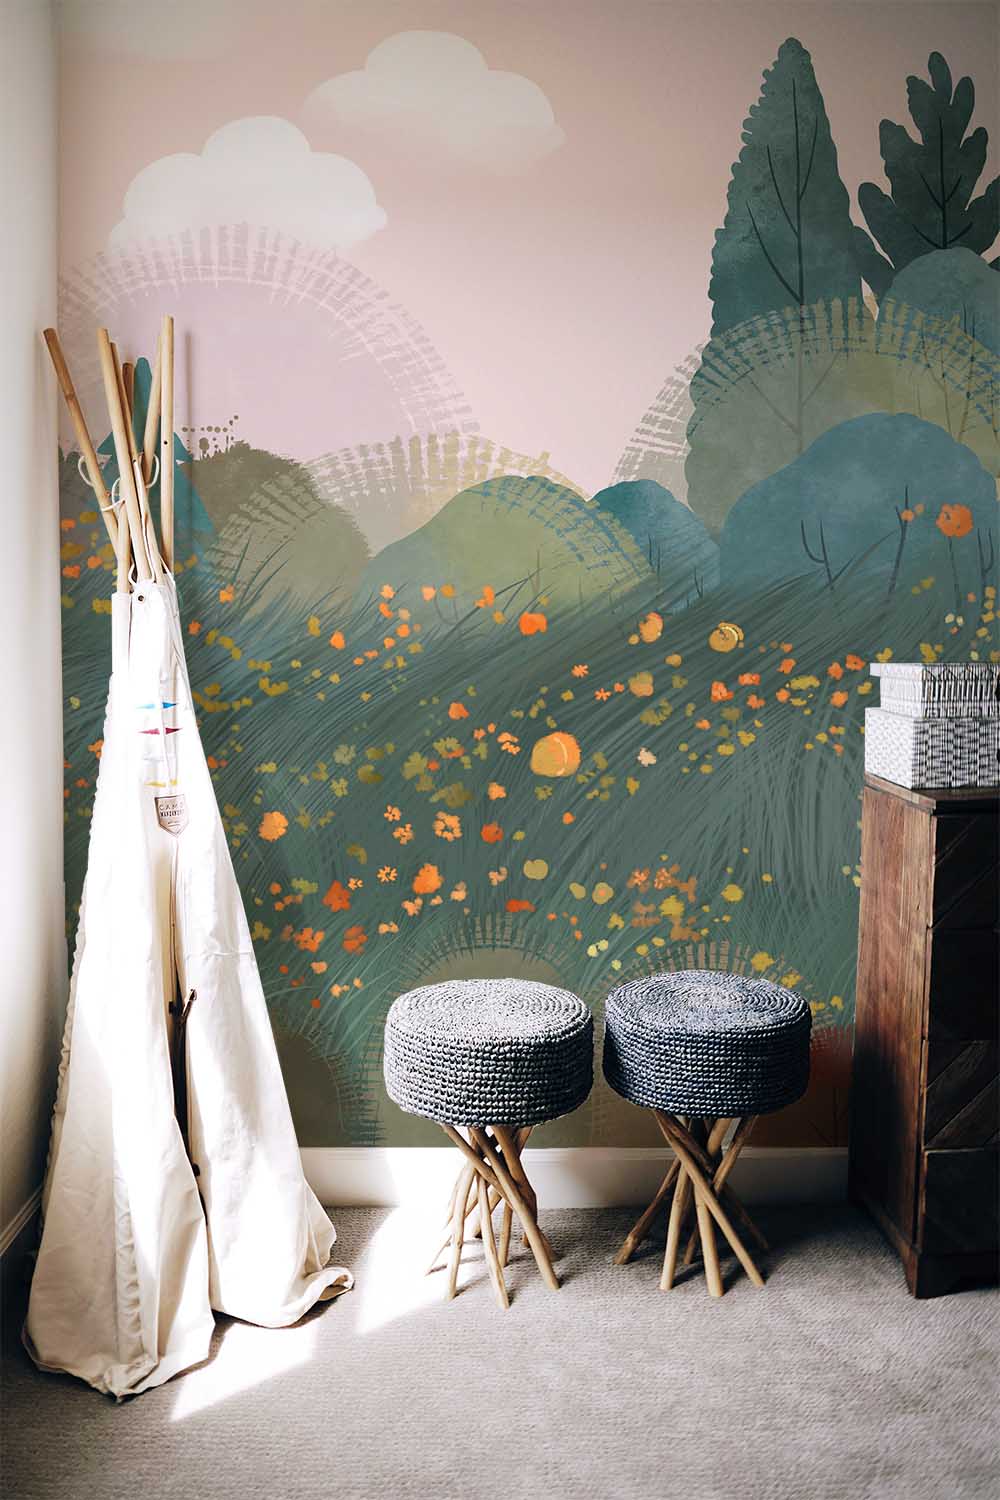 Home Decoration Wallpaper Mural Featuring a Cartoon Woodland and Floral Garden